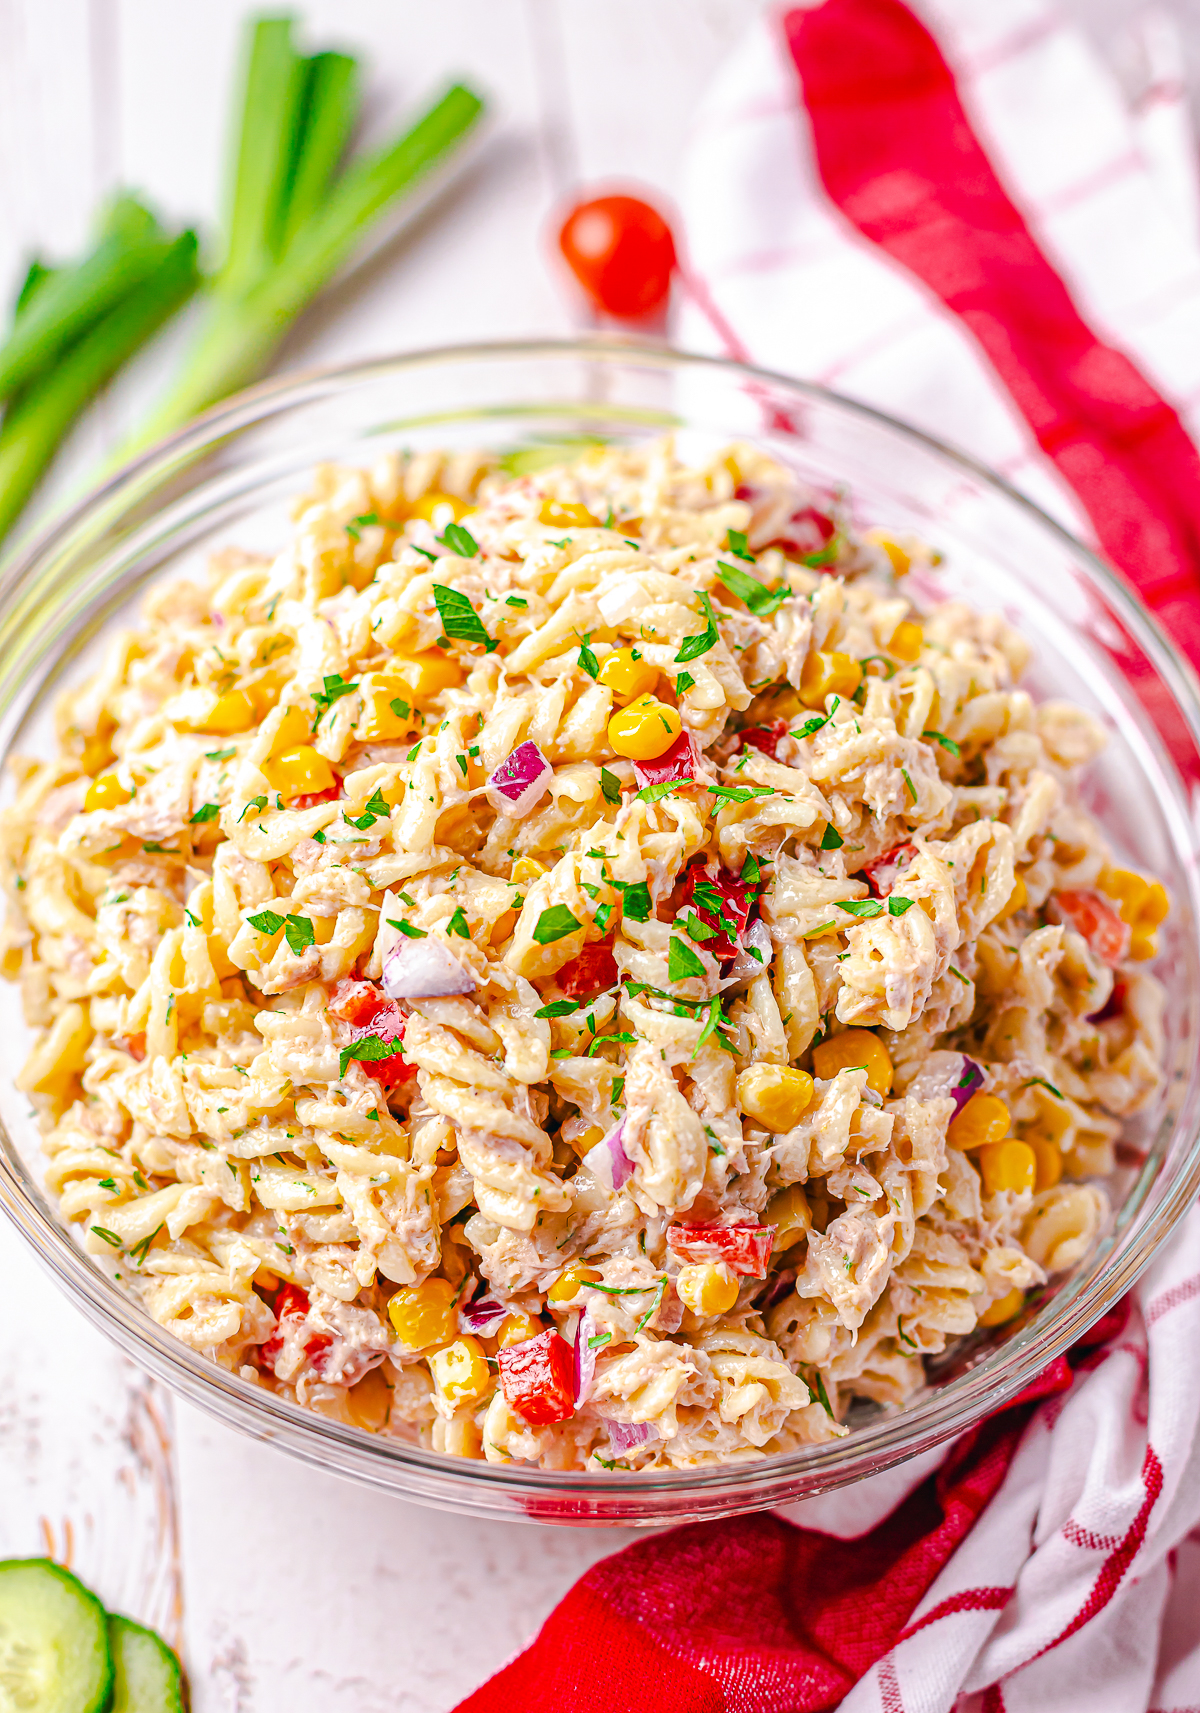 Finished Tuna Pasta Salad in clear bowl.